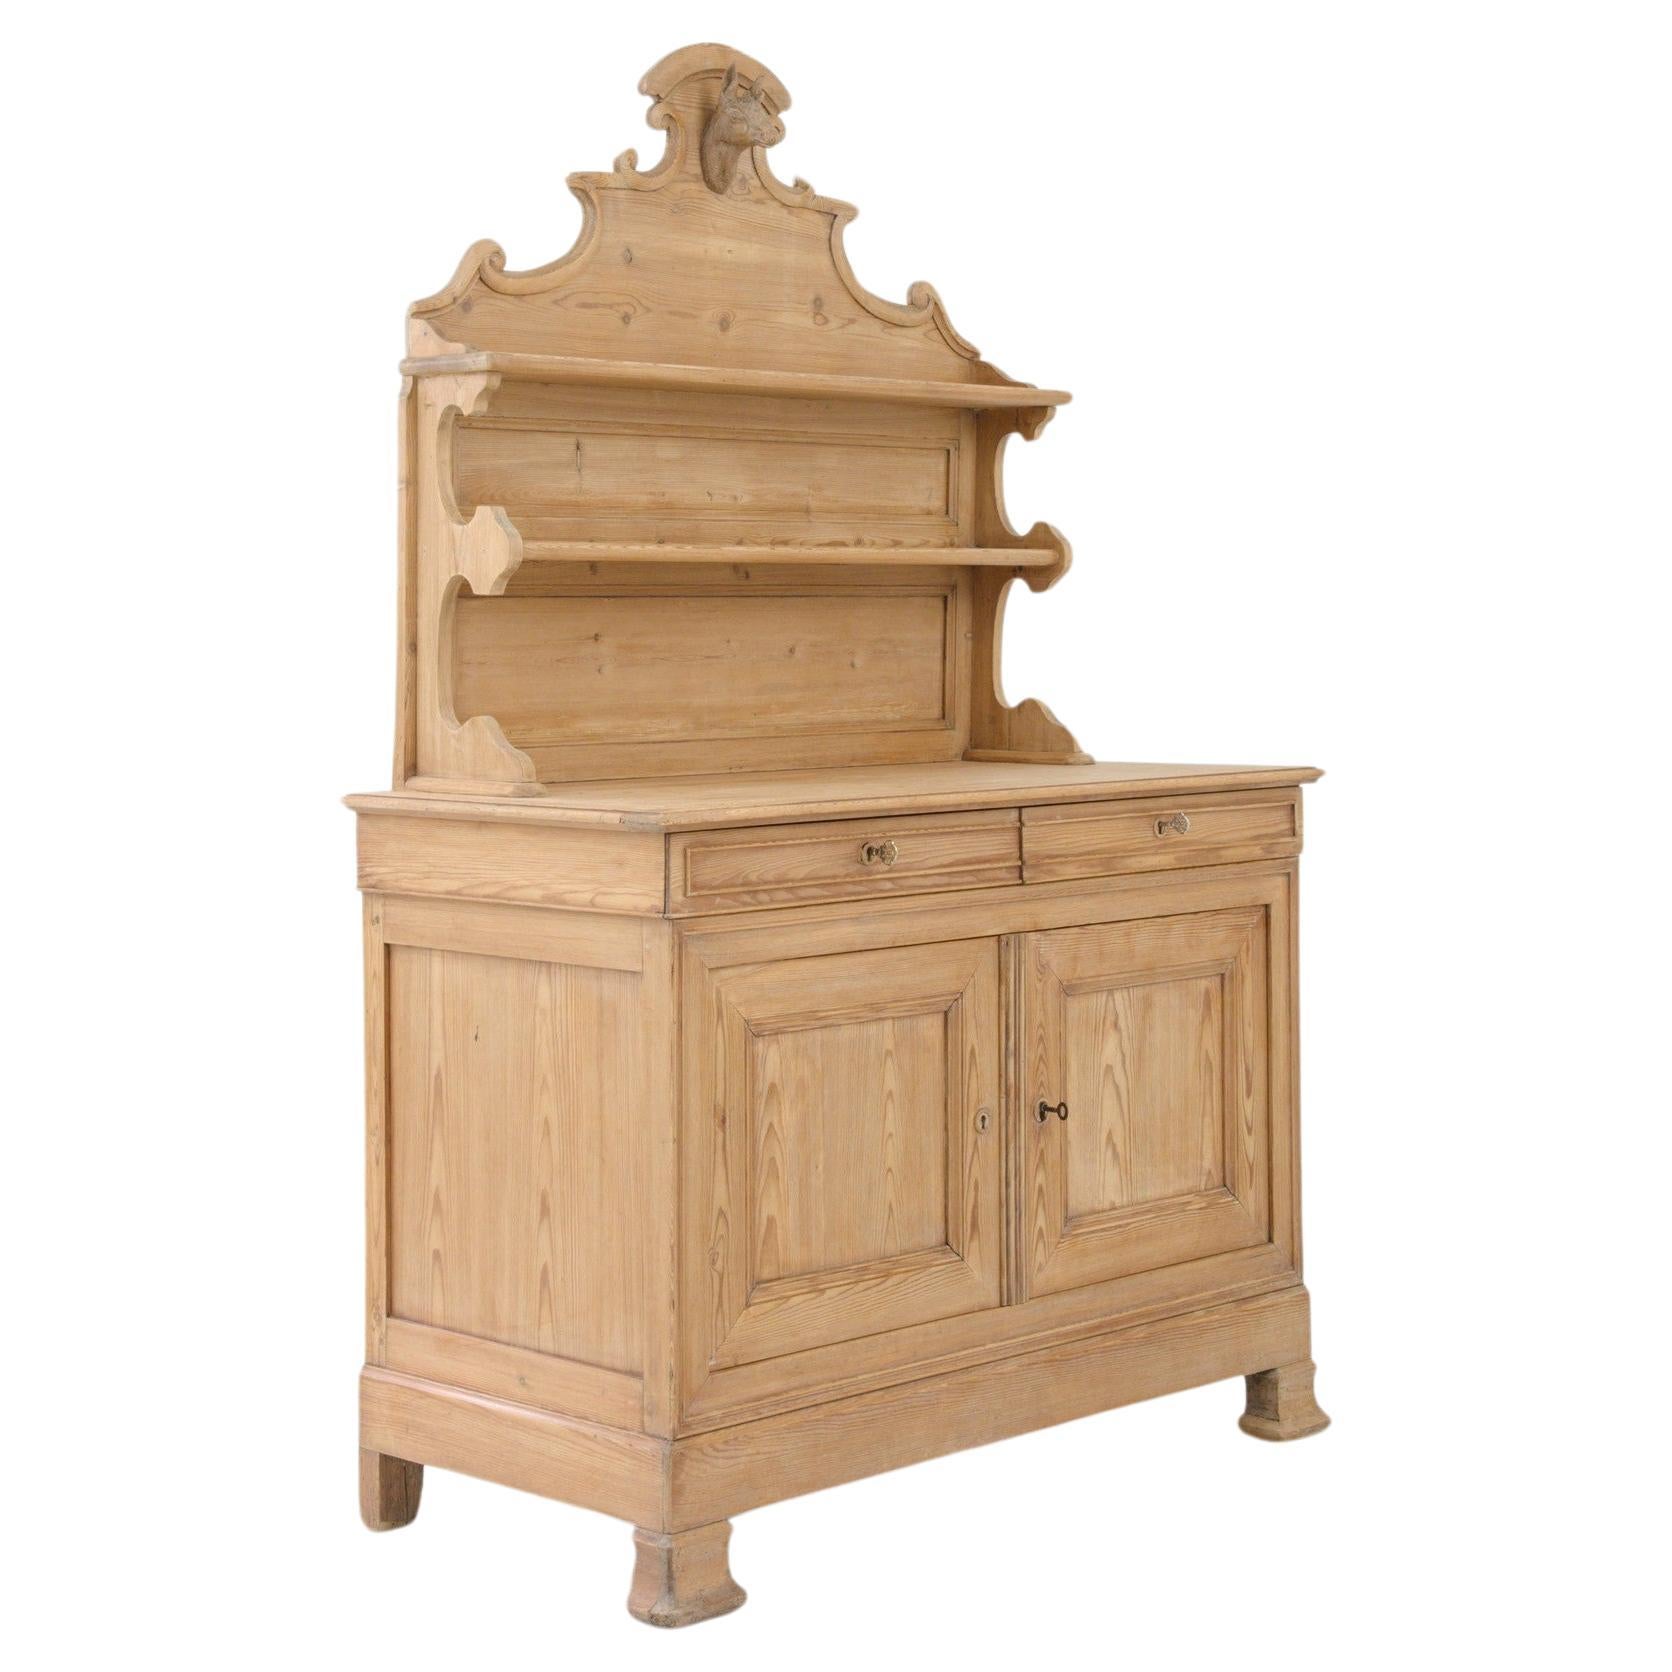 19th Century French Provincial Wooden Dresser